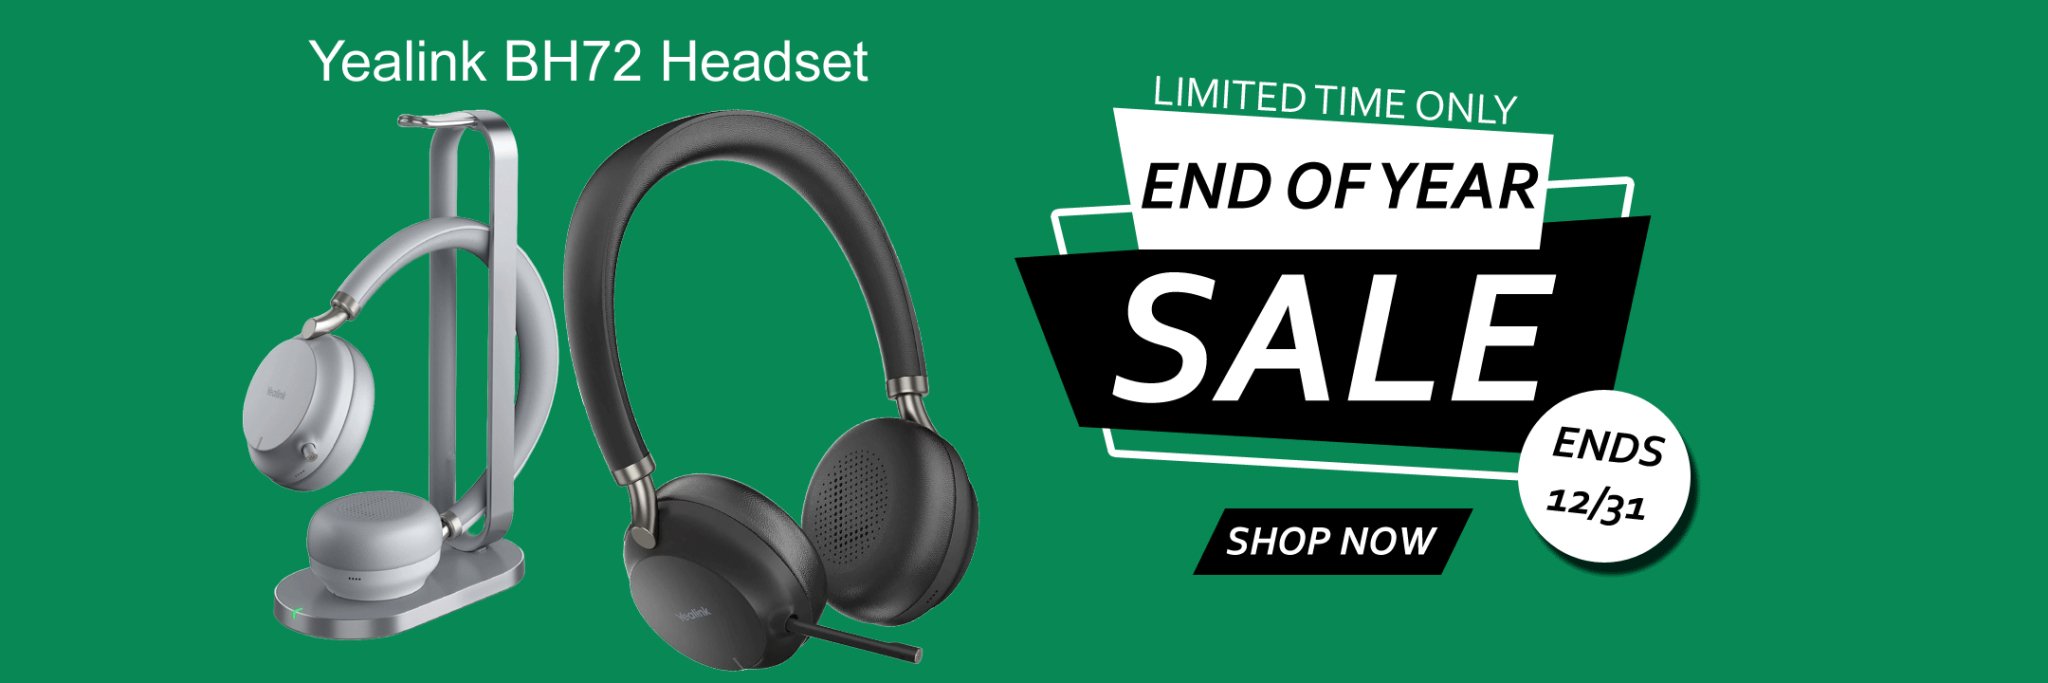 Unleash the Power of Productivity with Yealink BH72 Bluetooth Wireless Headset - Year-End Discount! - The Telecom Spot